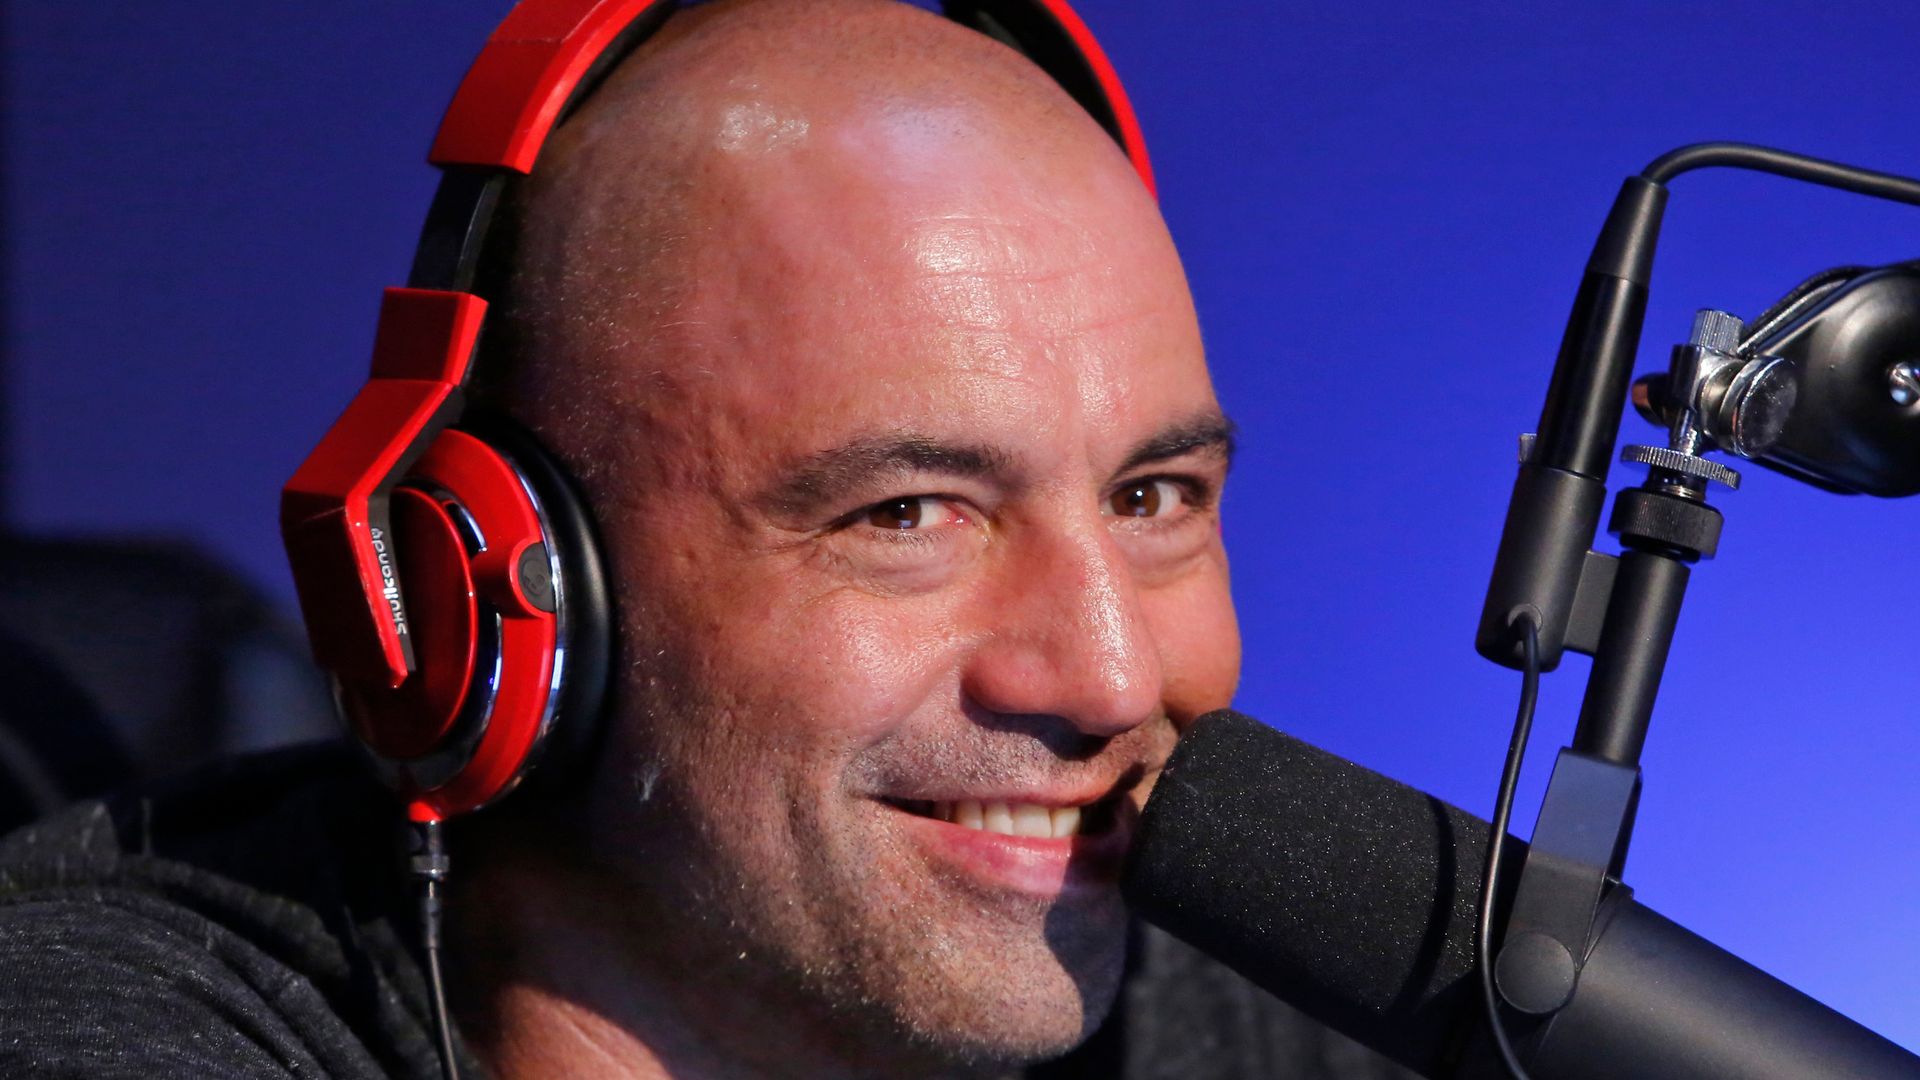 Joe Rogan’s live on-air gaffe about Biden, Trump and airports is a perfect example of how disinformation spreads.